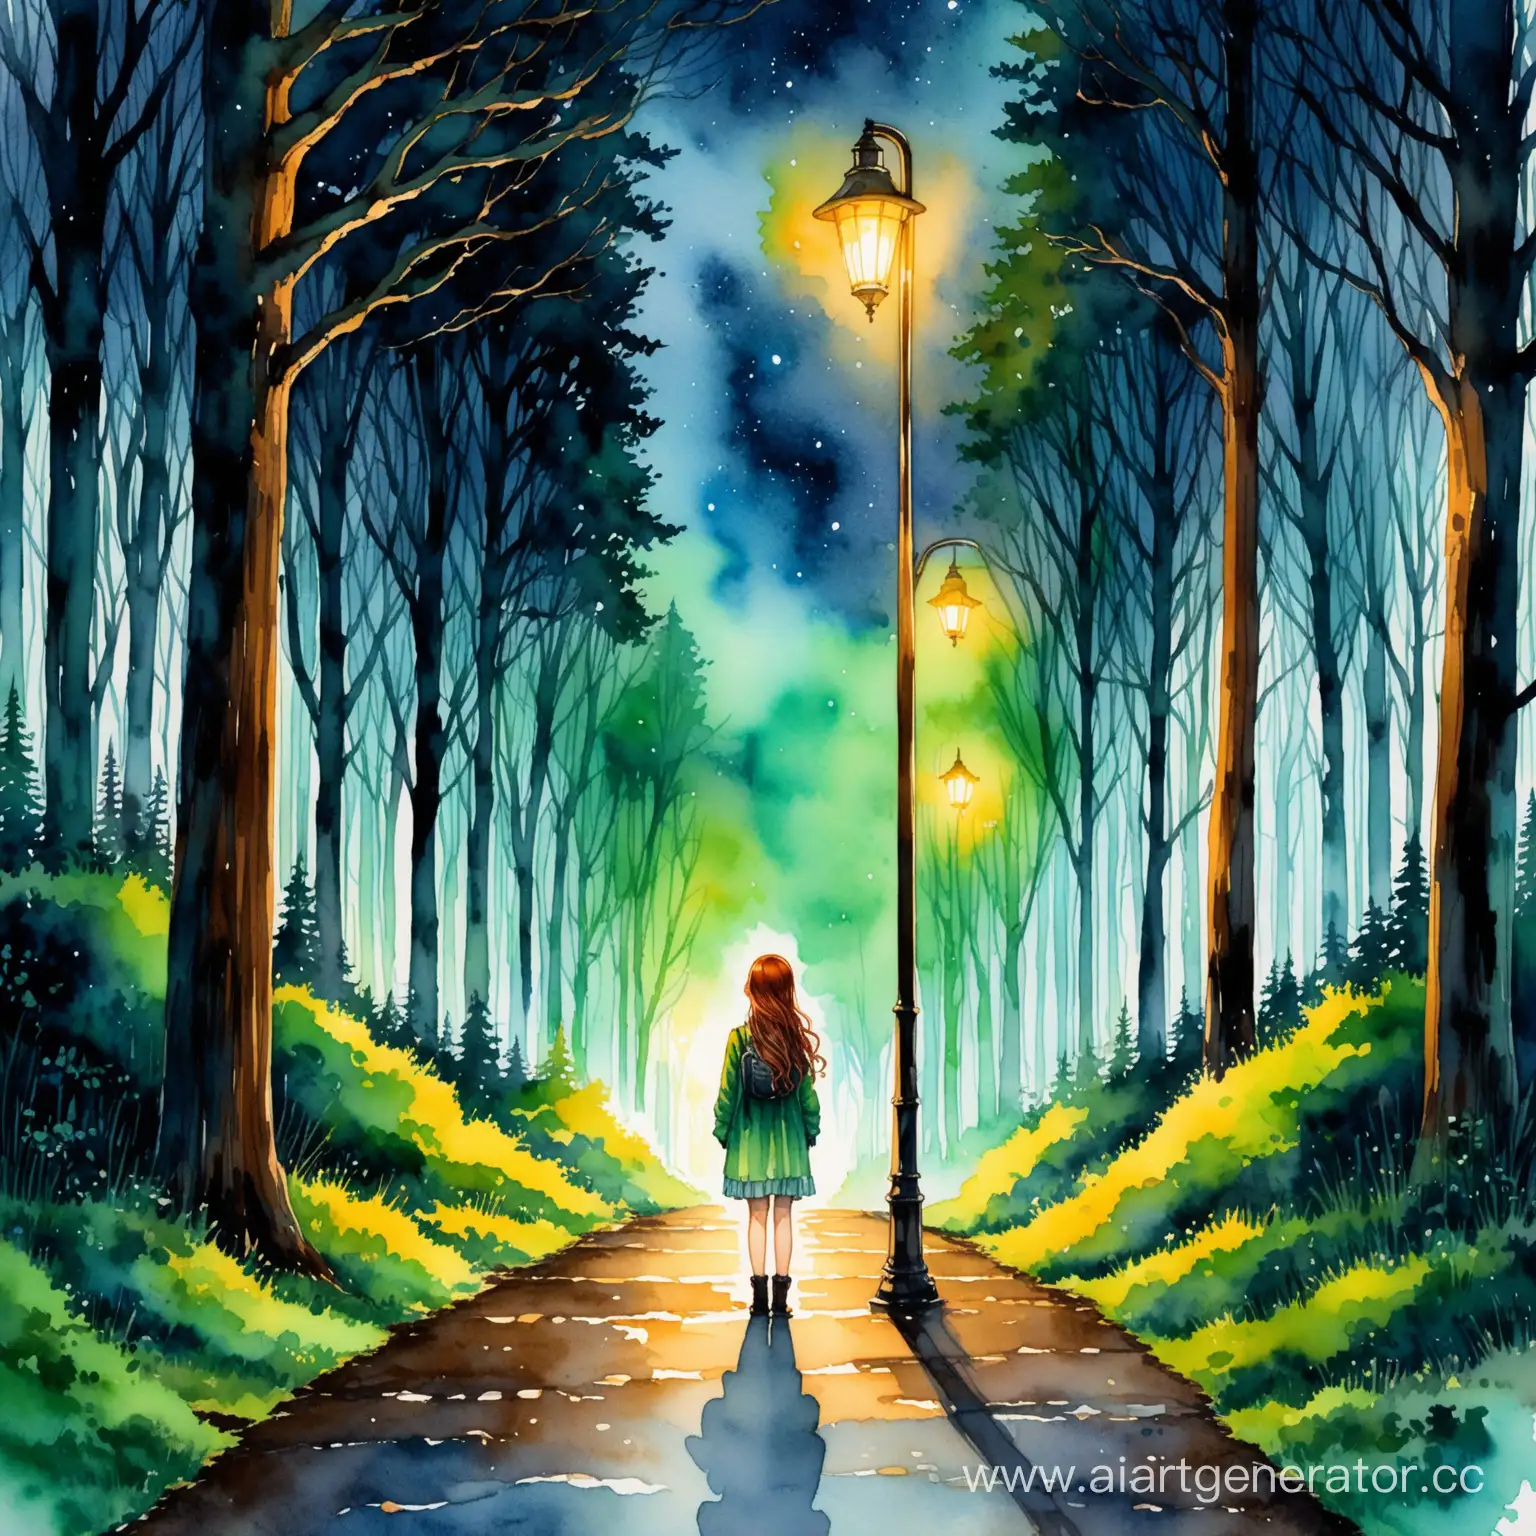 Enchanting-Slavic-Girl-with-Chestnut-Curls-under-Glowing-Street-Lamp-in-Night-Forest